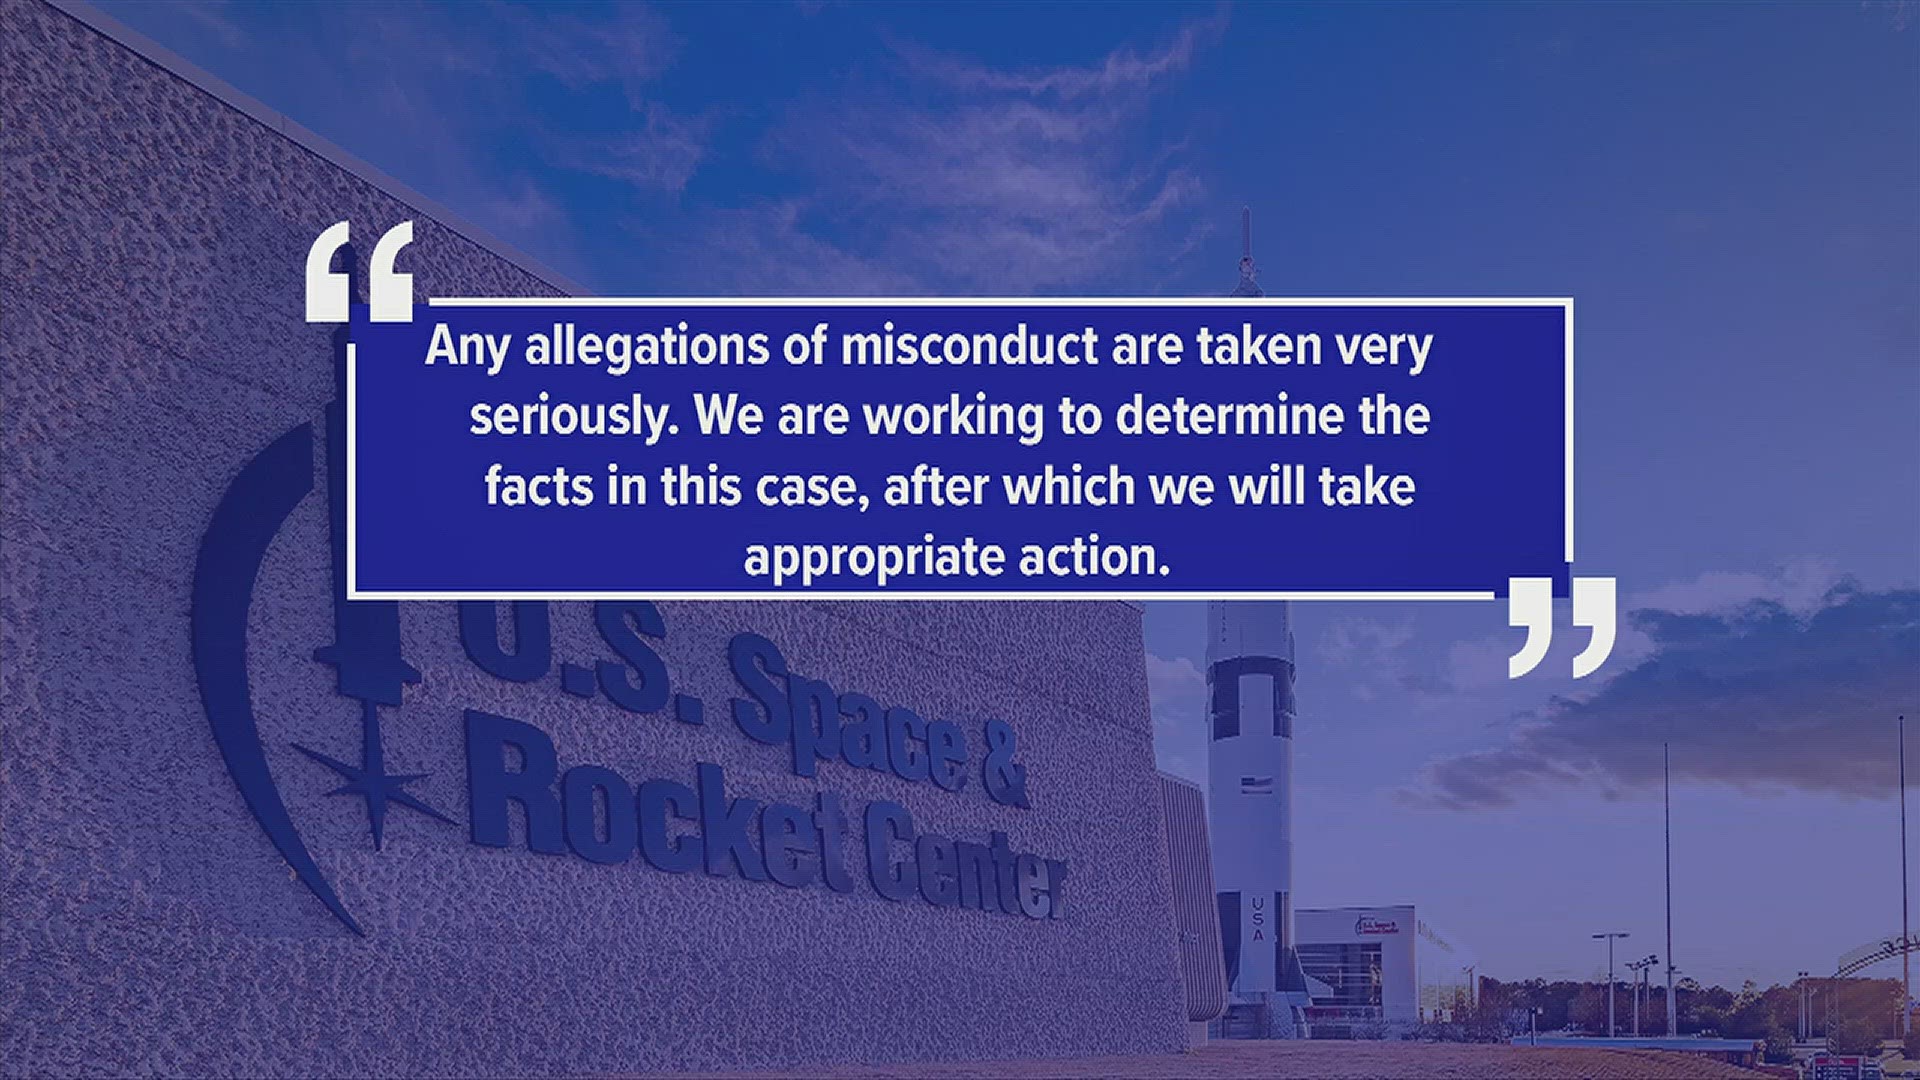 Space Camp officials say they are taking allegations seriously and are working to determine the facts.